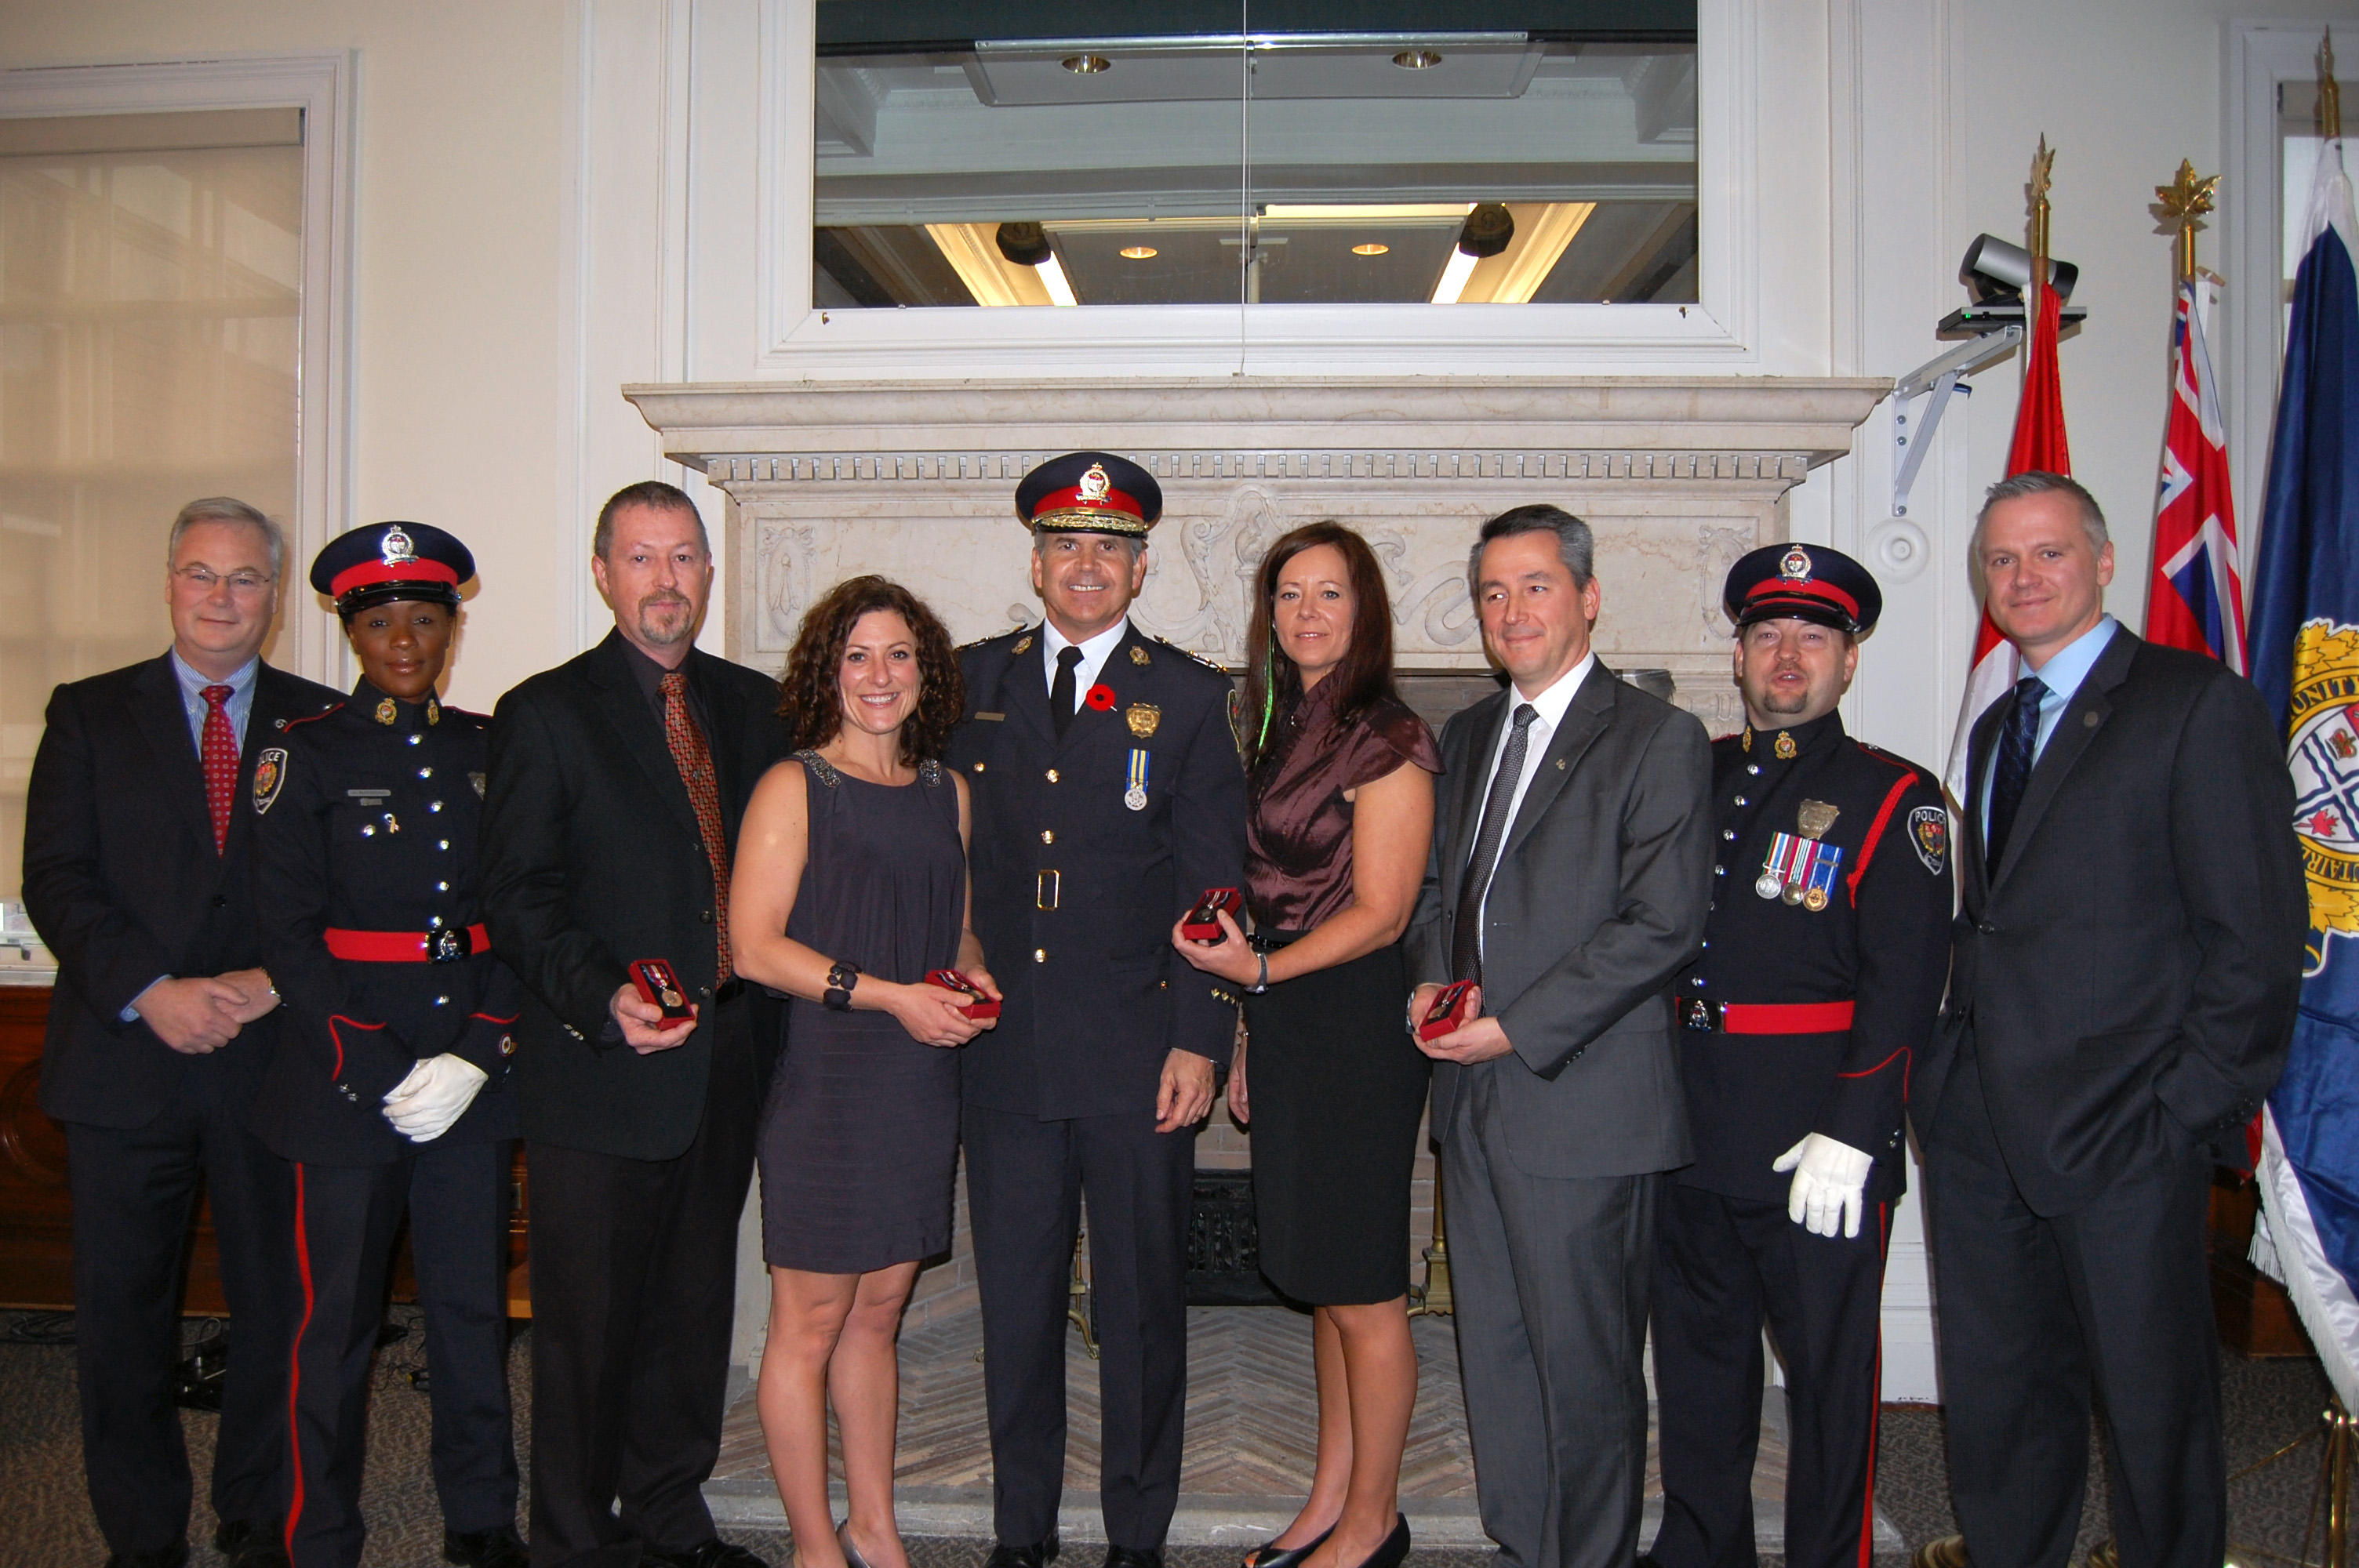 Chief Bordeleau recognizes The Ottawa Hospital with Queen’s Jubilee Medals